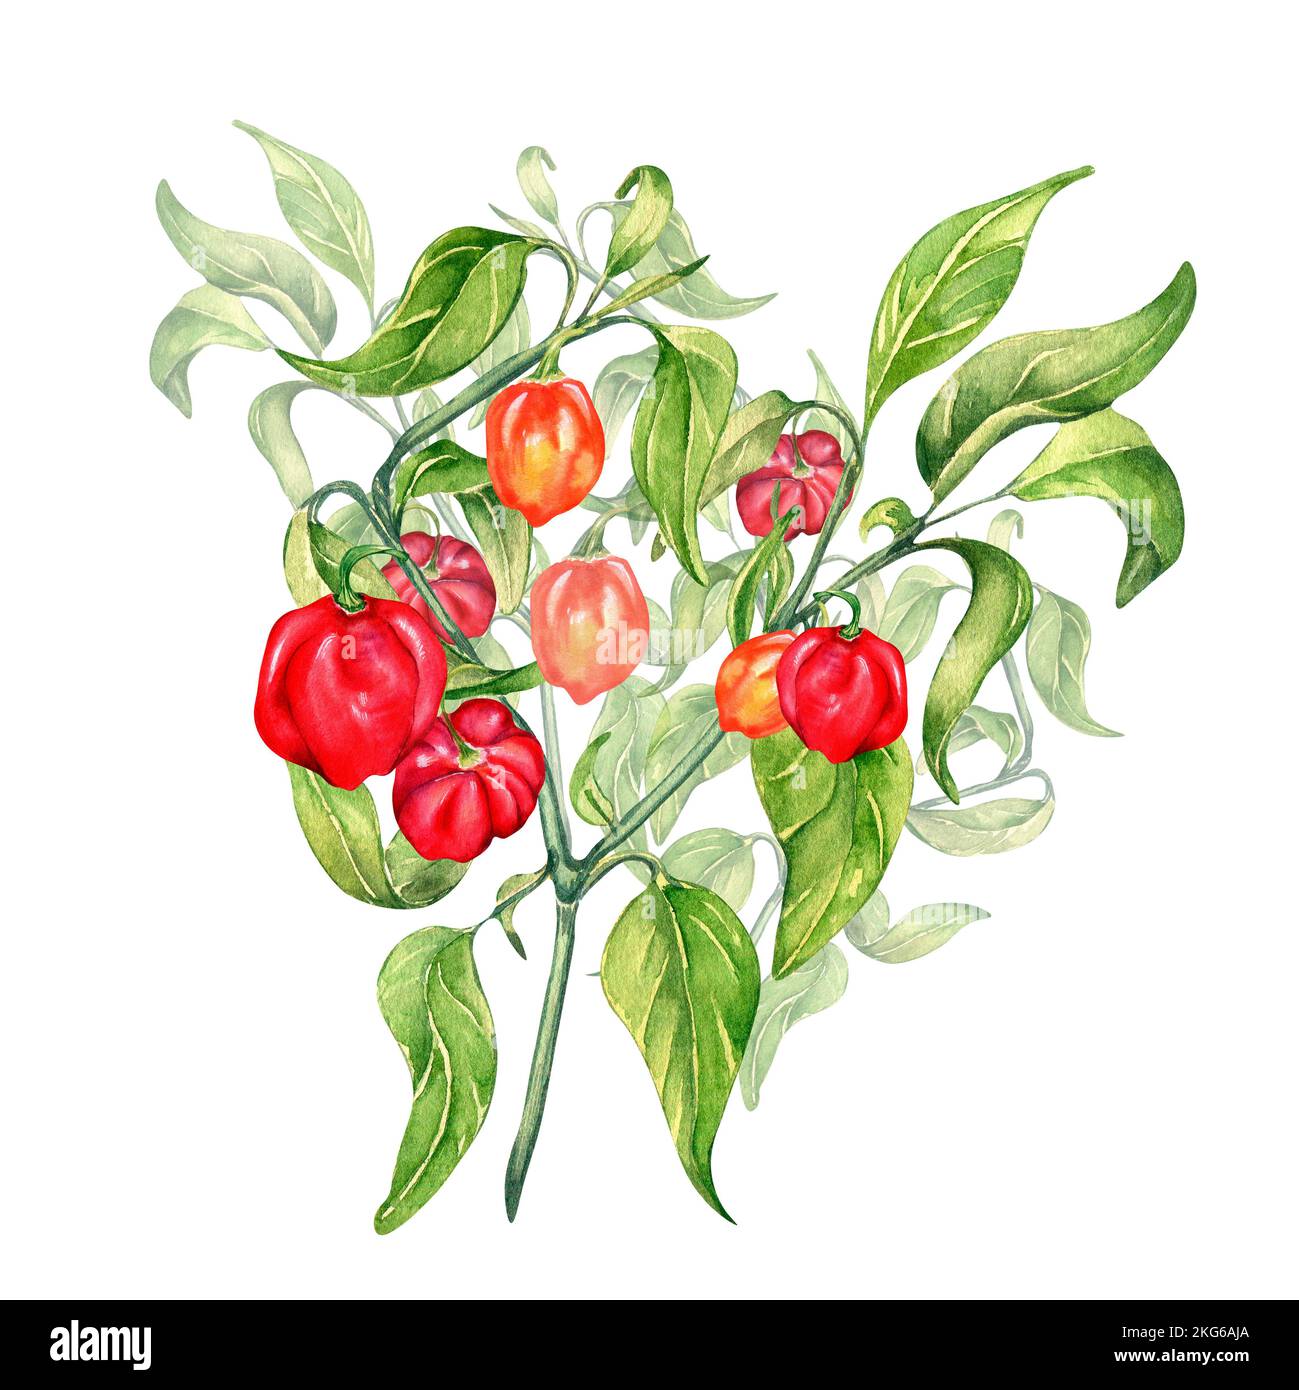 Habanero chili pepper bush watercolor illustration isolated on white background. Spicy pepper plant hand drawn. Design element for wrapping, menu, mar Stock Photo